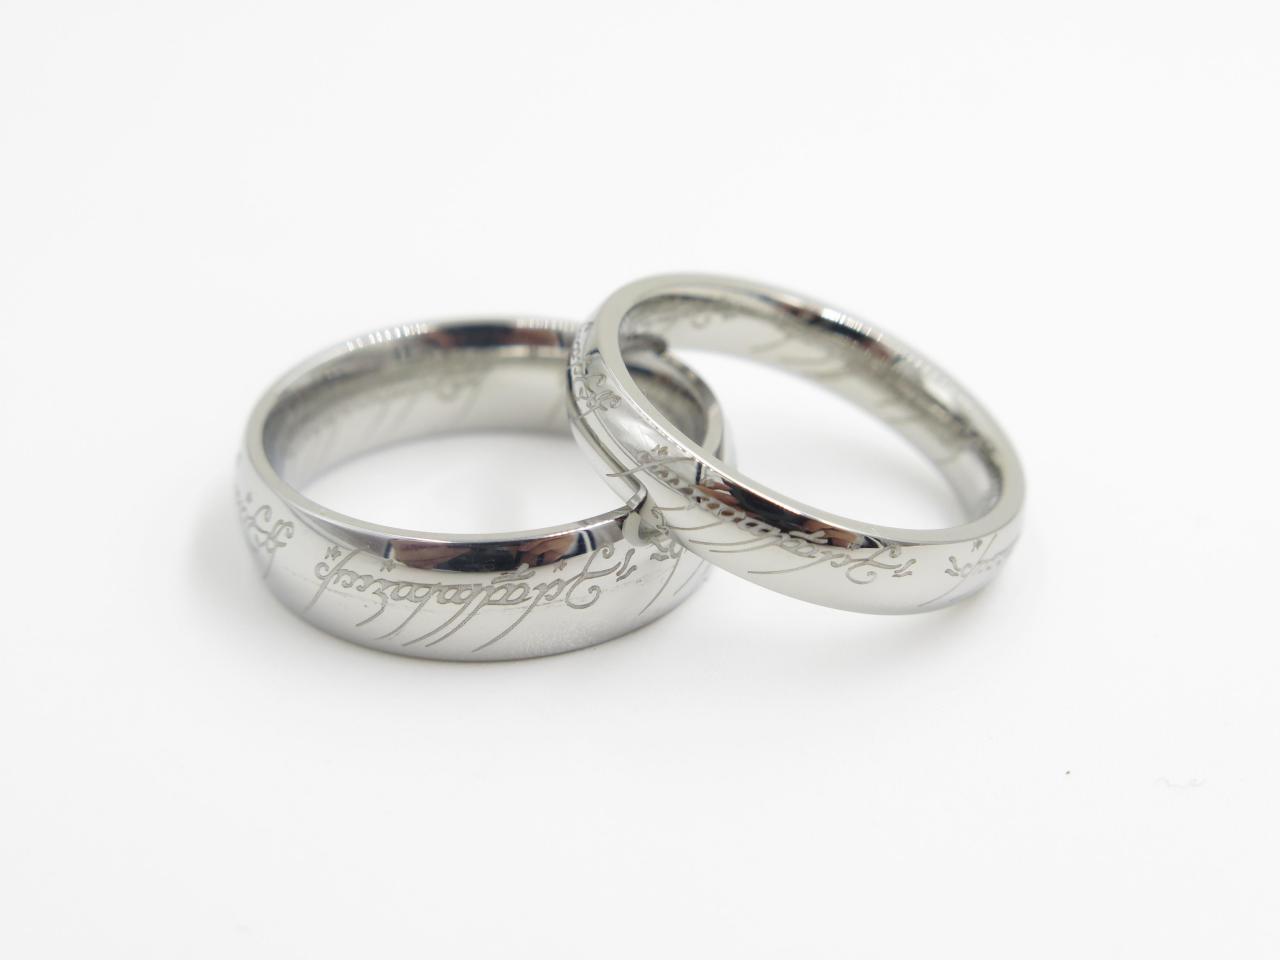 ... Rings, his and hers wedding ring sets, promise rings, matching rings